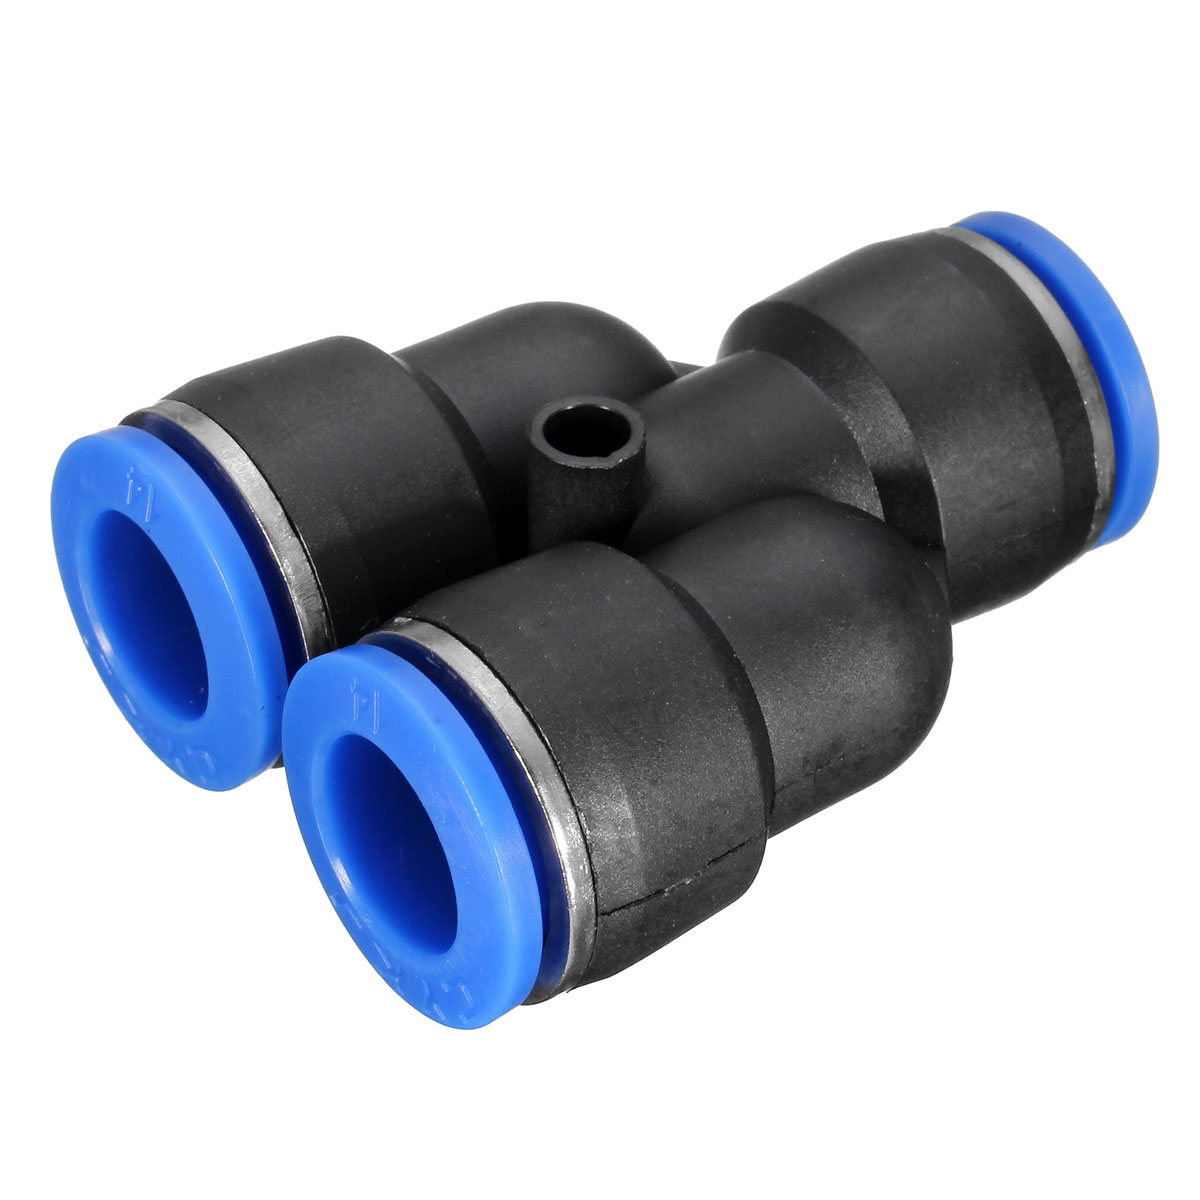 Pneumatic-Push-In-Fittings-For-Air-Water-Hose-Pipe-Connectors-Tube-Connector-1030560-4